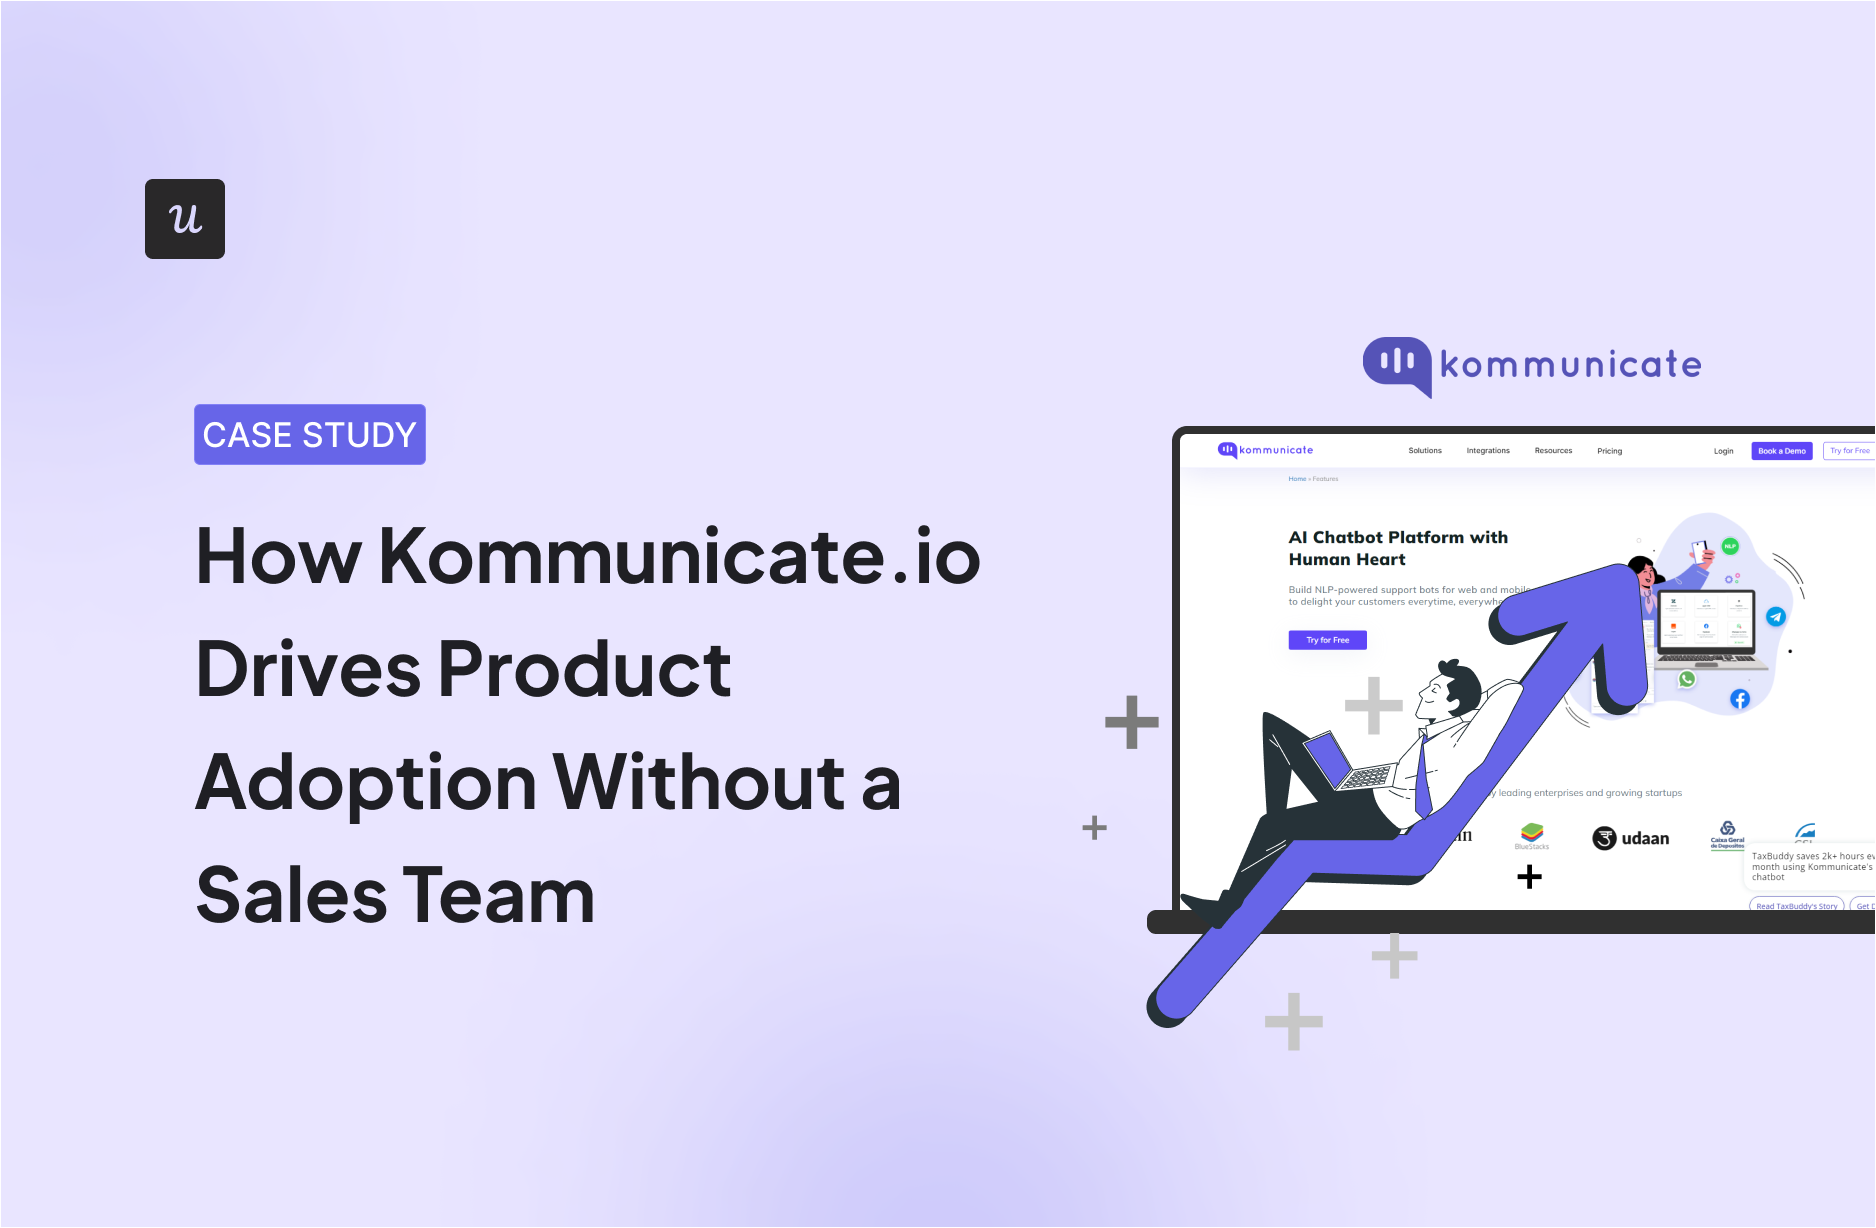 How-Kommunicate-io-Drives-Product Adoption-Without-a-Sales-Team